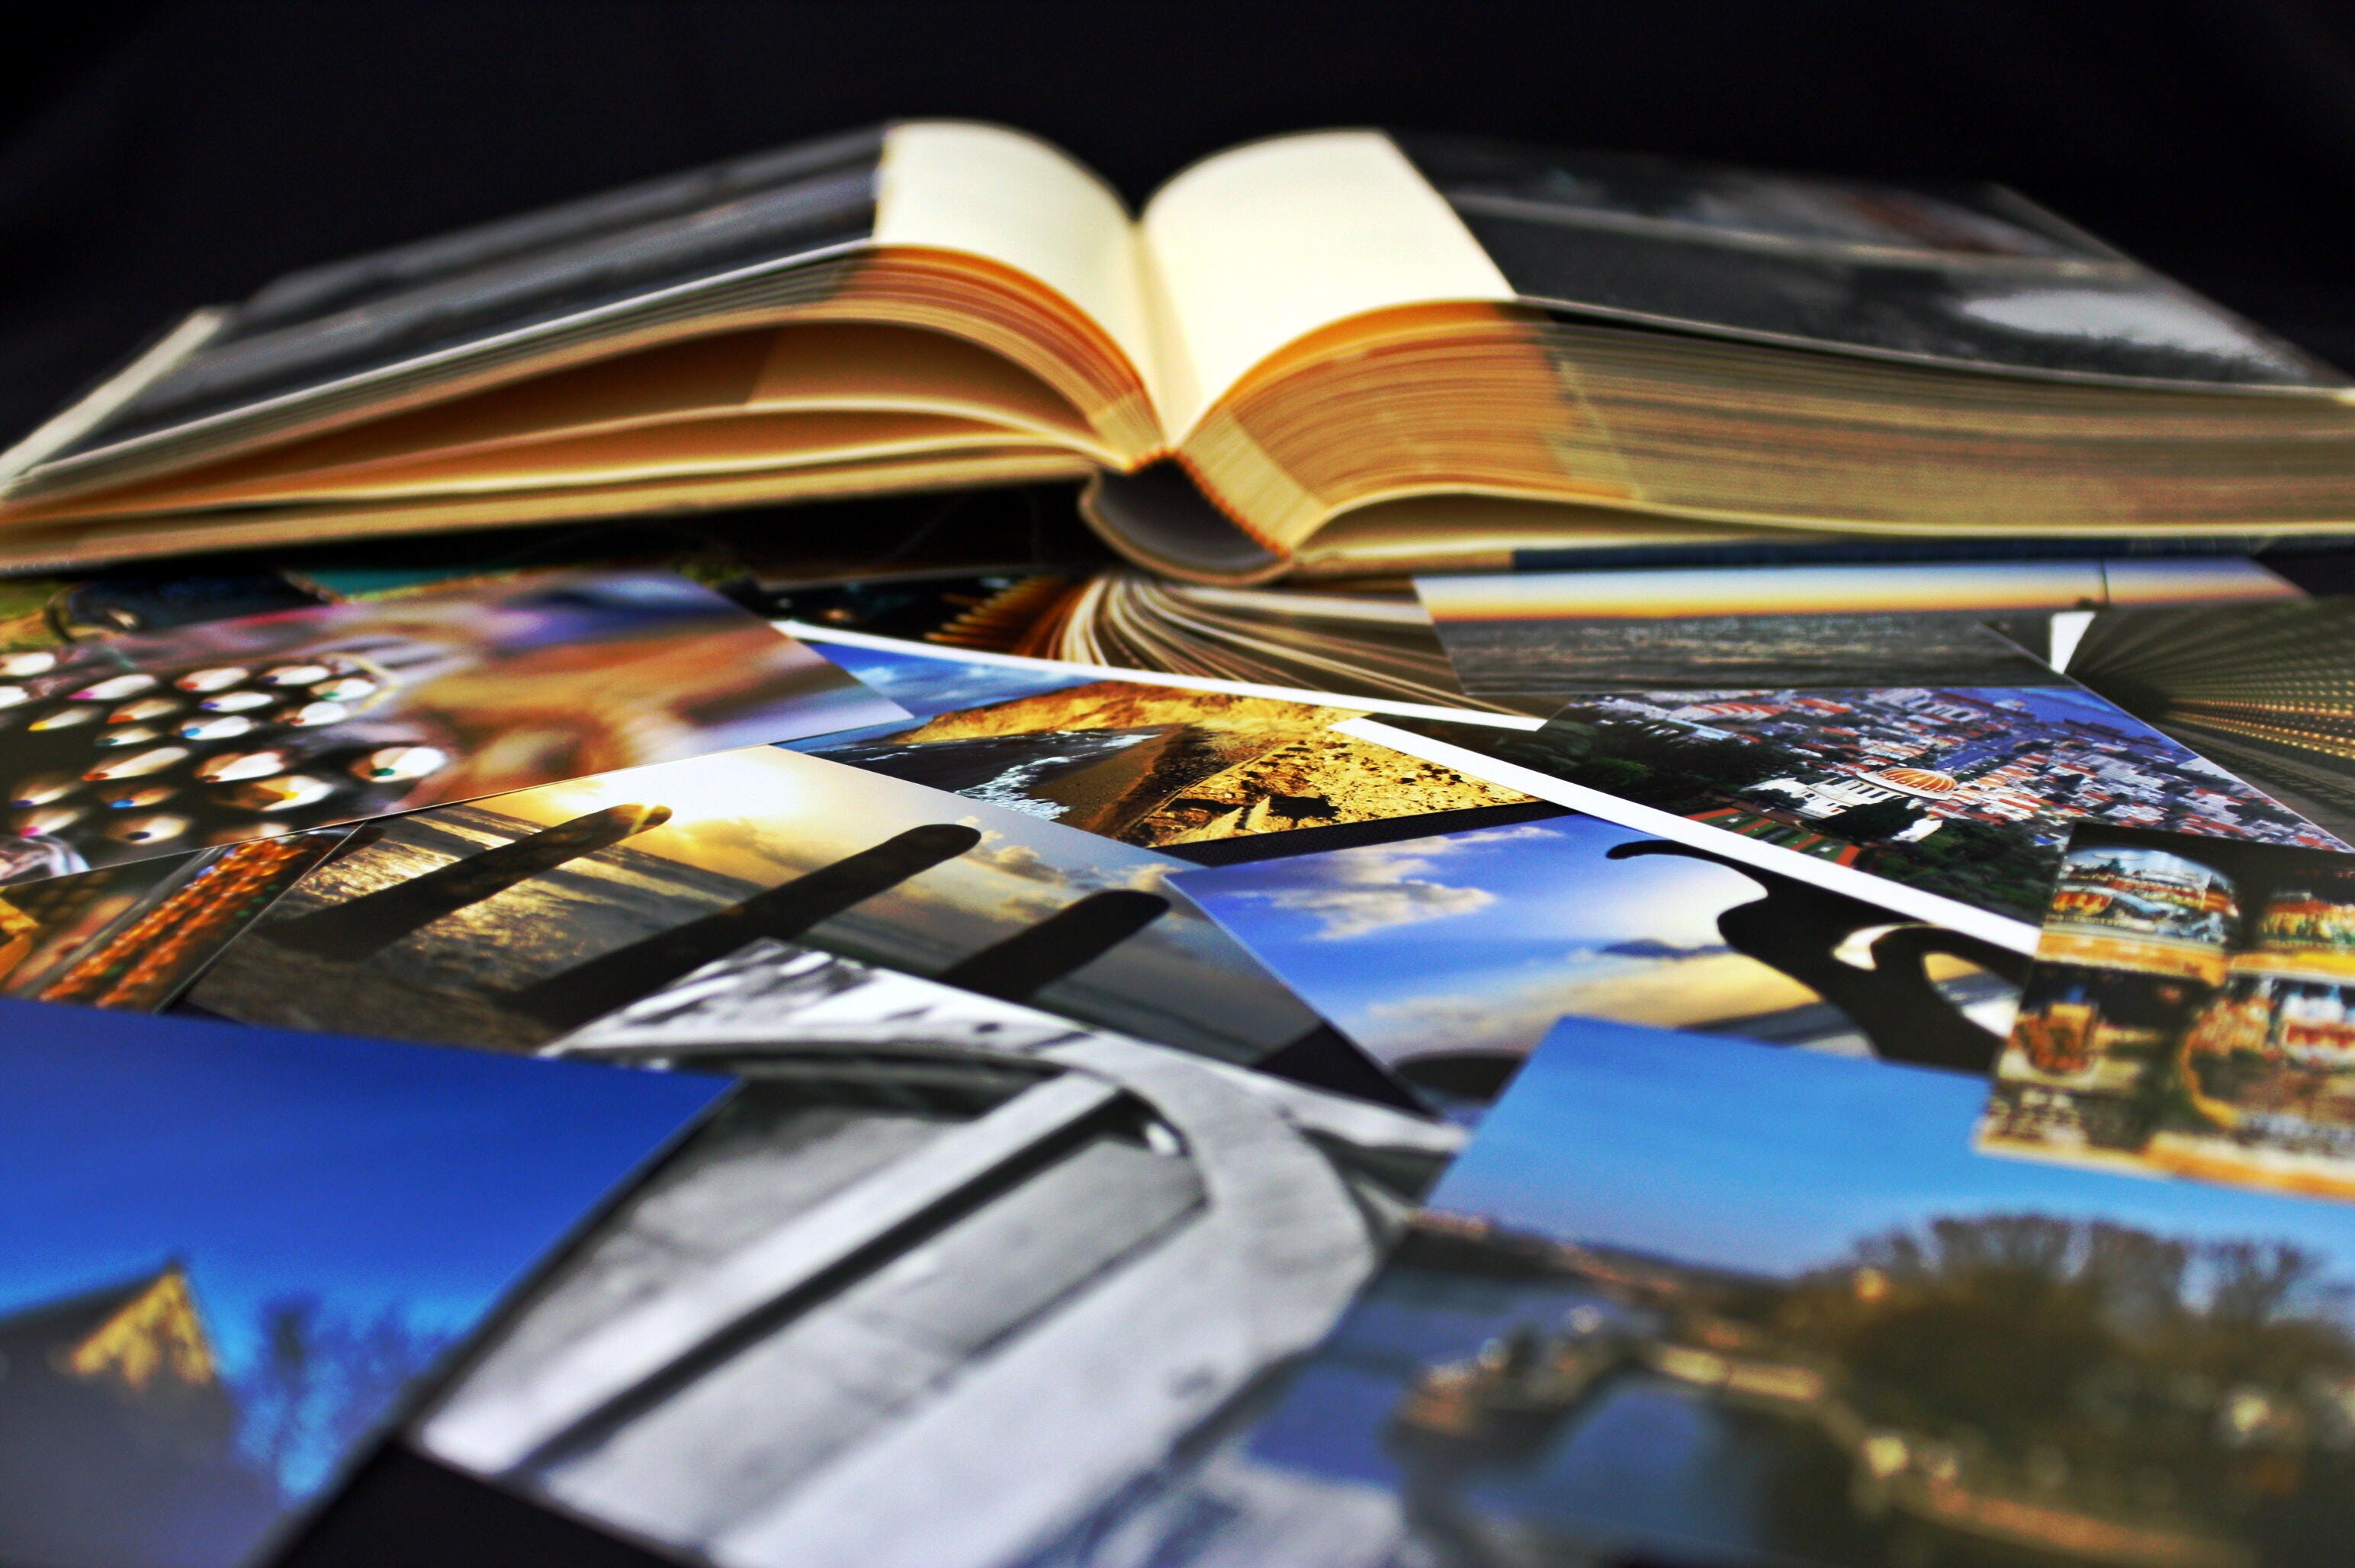 Best photo books for 2021